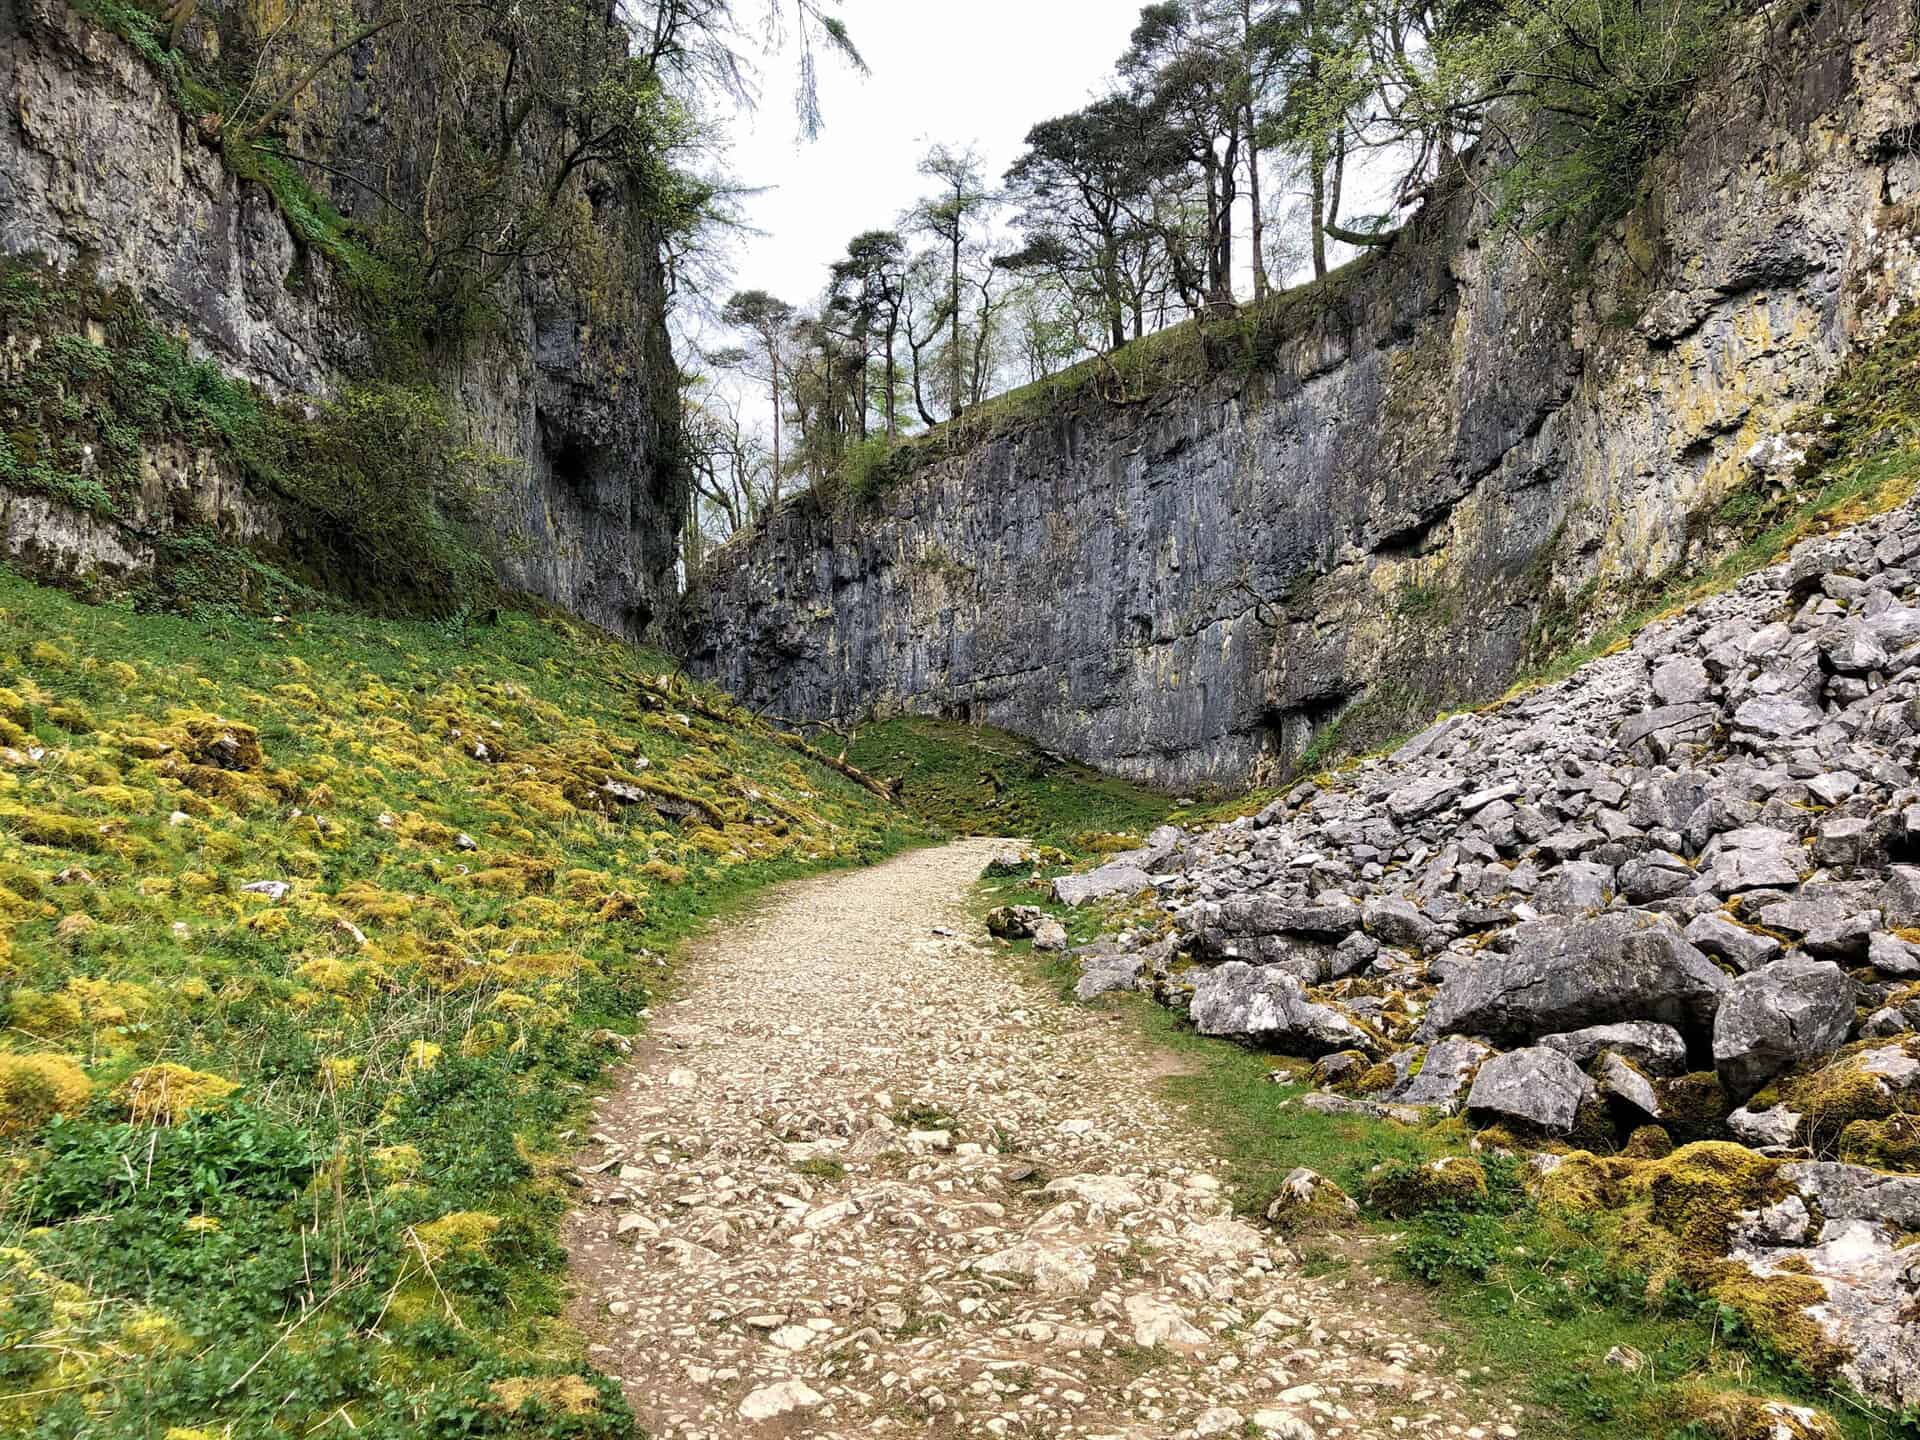 The Trow Gill dry gorge.